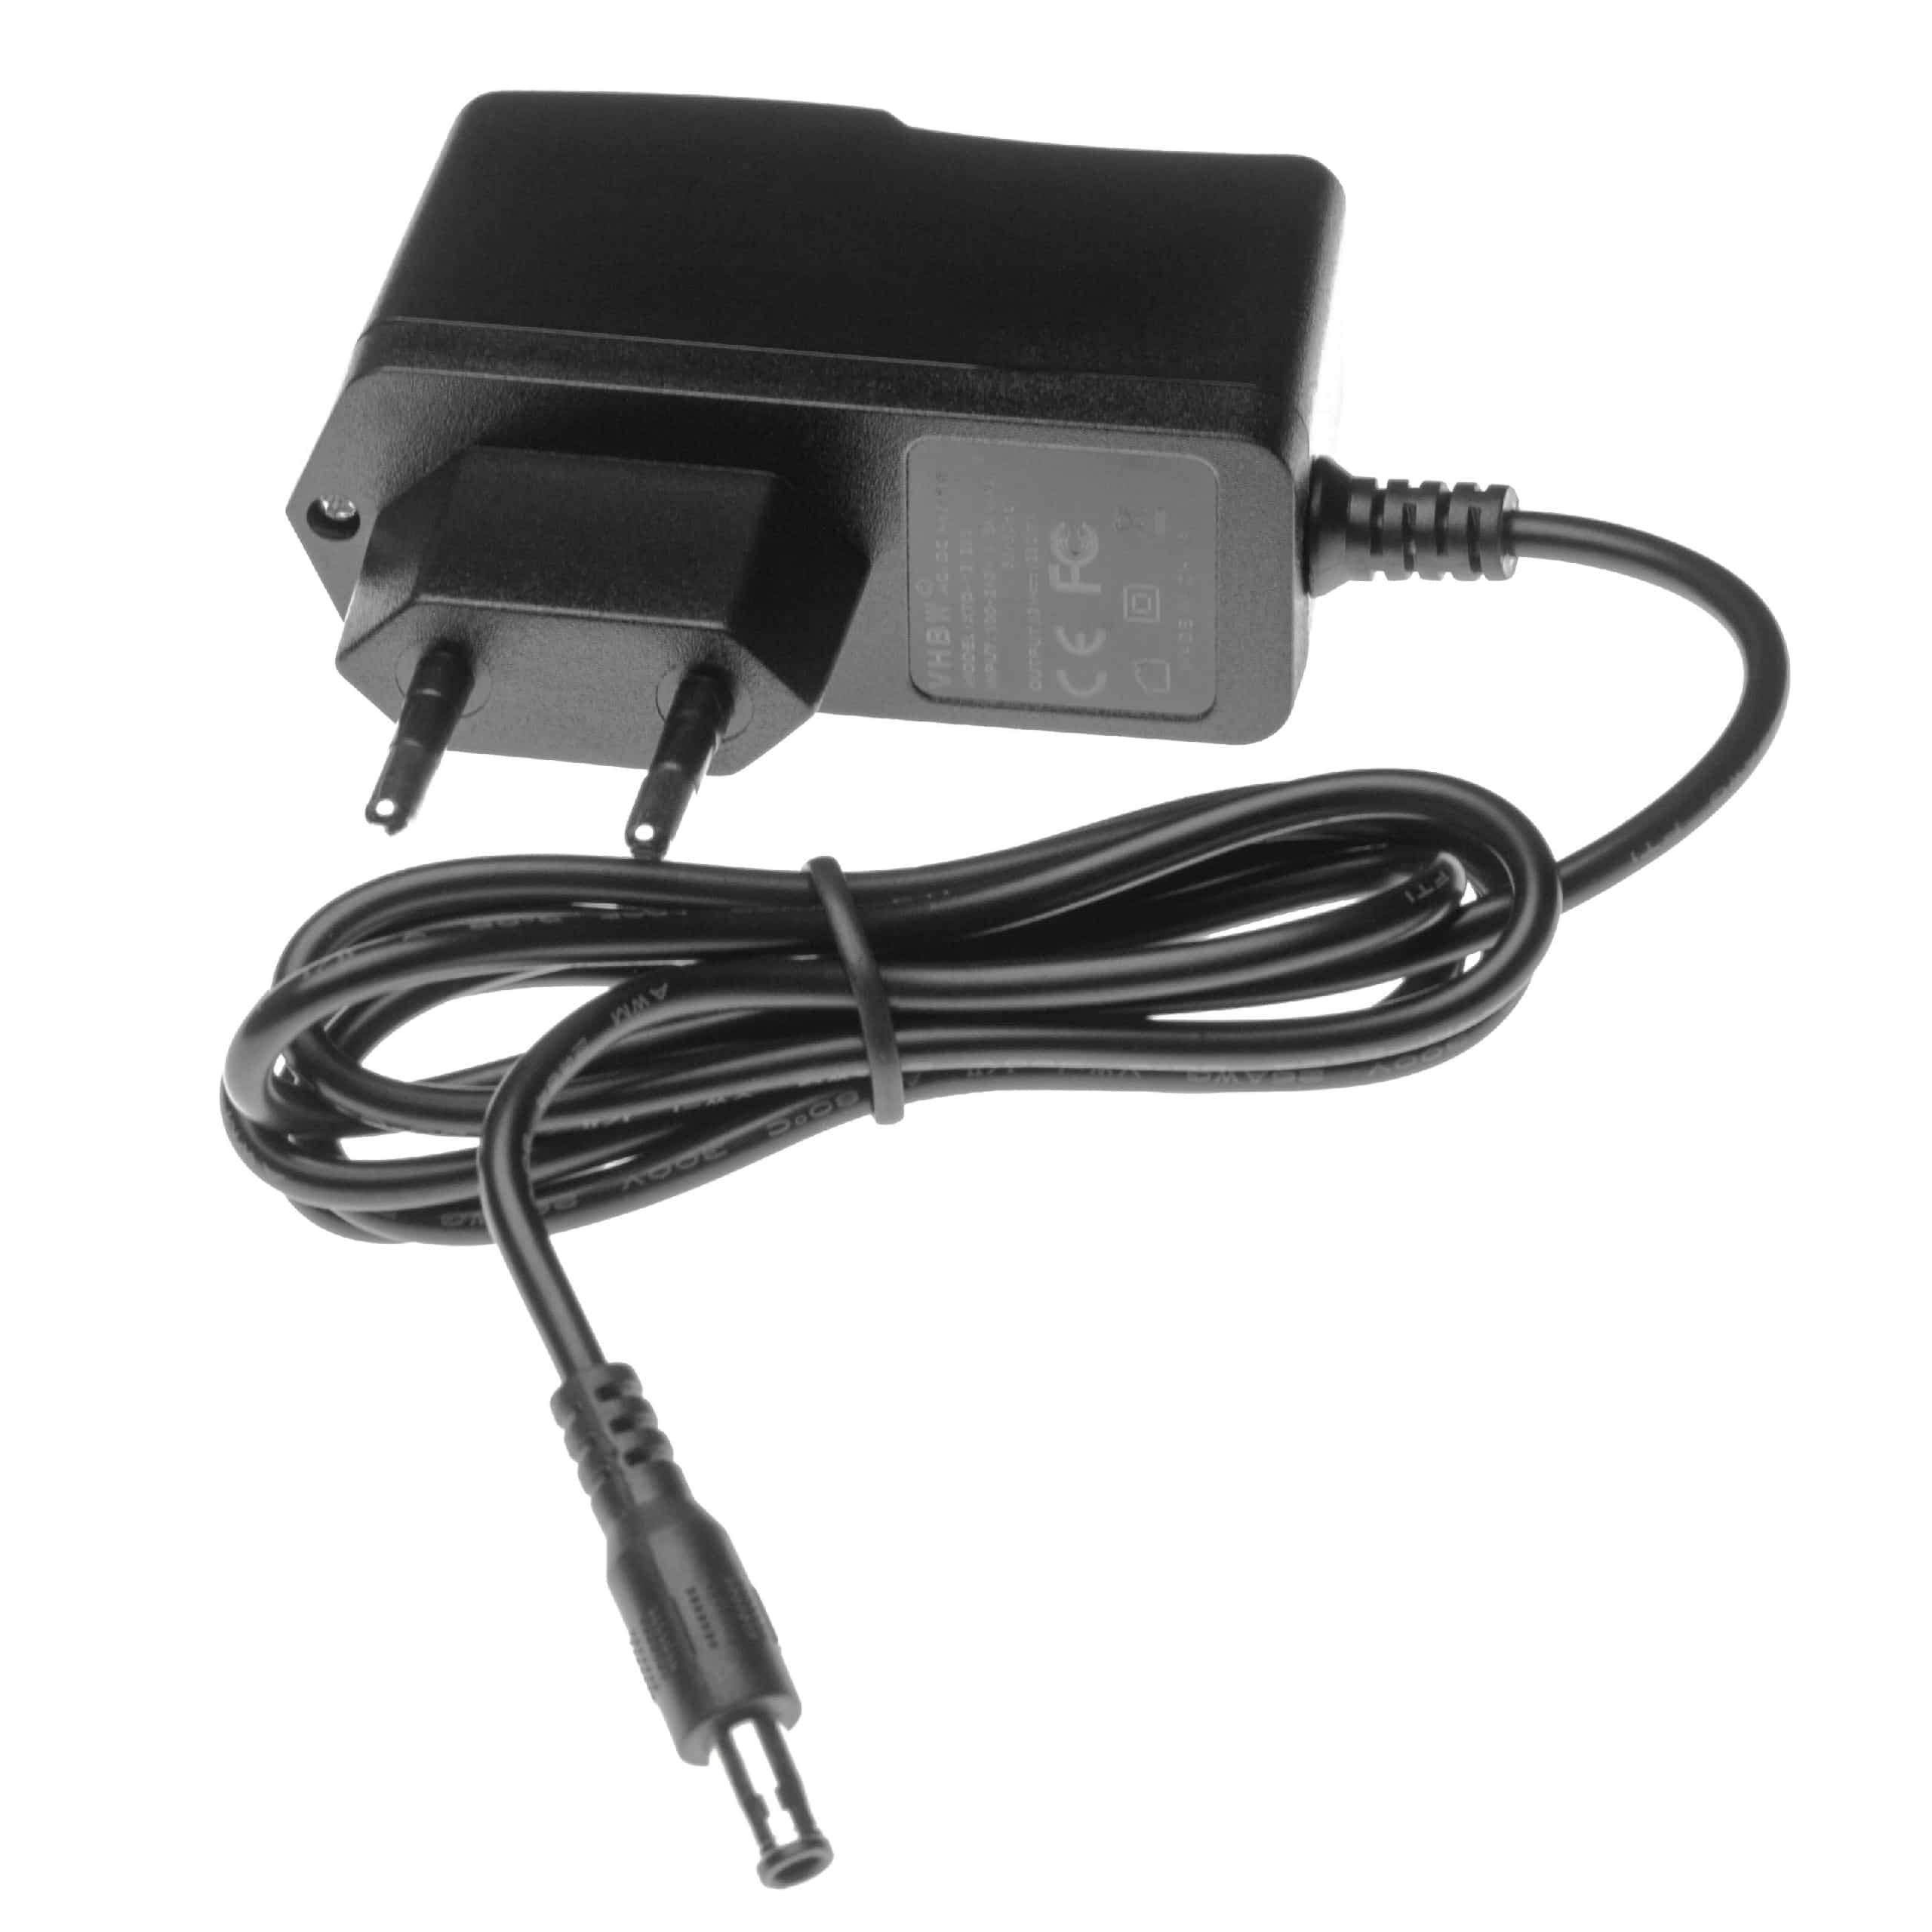 Mains Power Adapter replaces Philips LFH 0155, LFH0155 for Philips Dictaphone - DC 12 V / 1.25 A